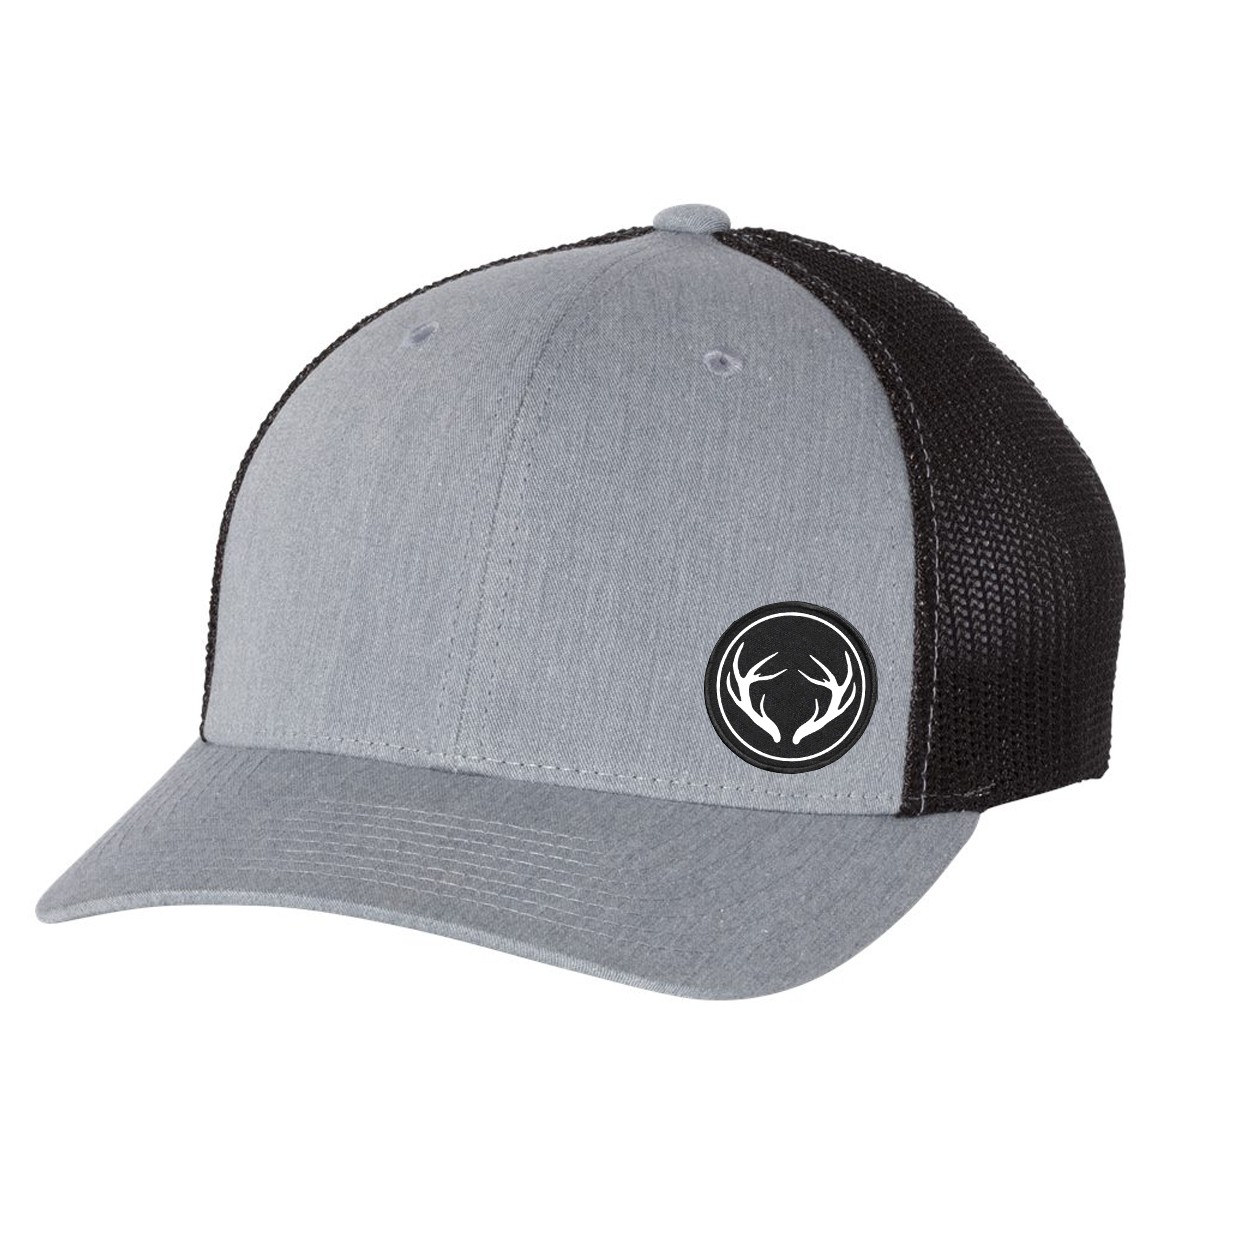 Hunt Rack Icon Logo Night Out Woven Circle Patch Snapback Trucker Hat Heather Gray/Black (White Logo)